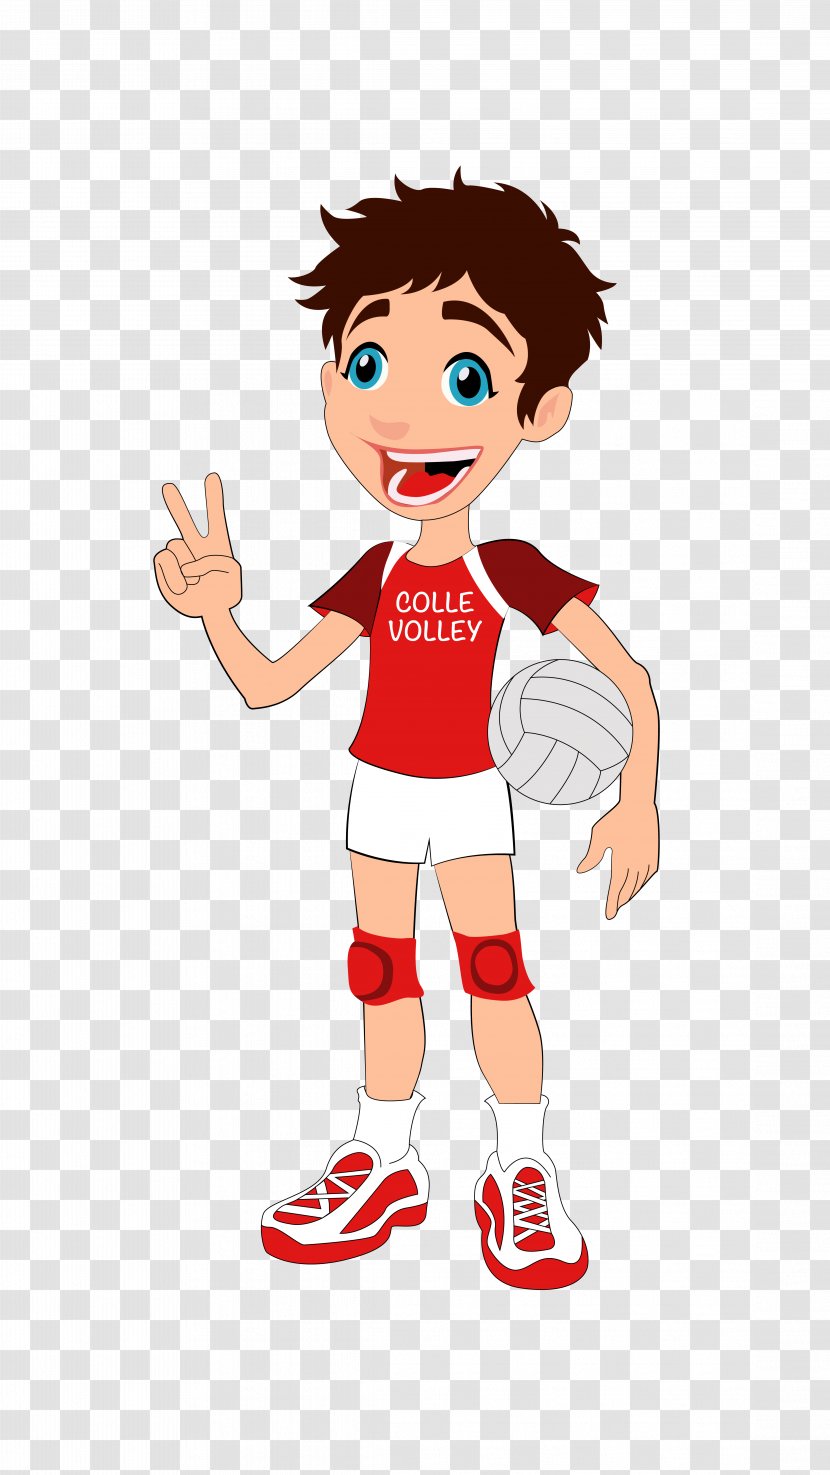 Volleyball Cartoon - Football Player - Style Gesture Transparent PNG